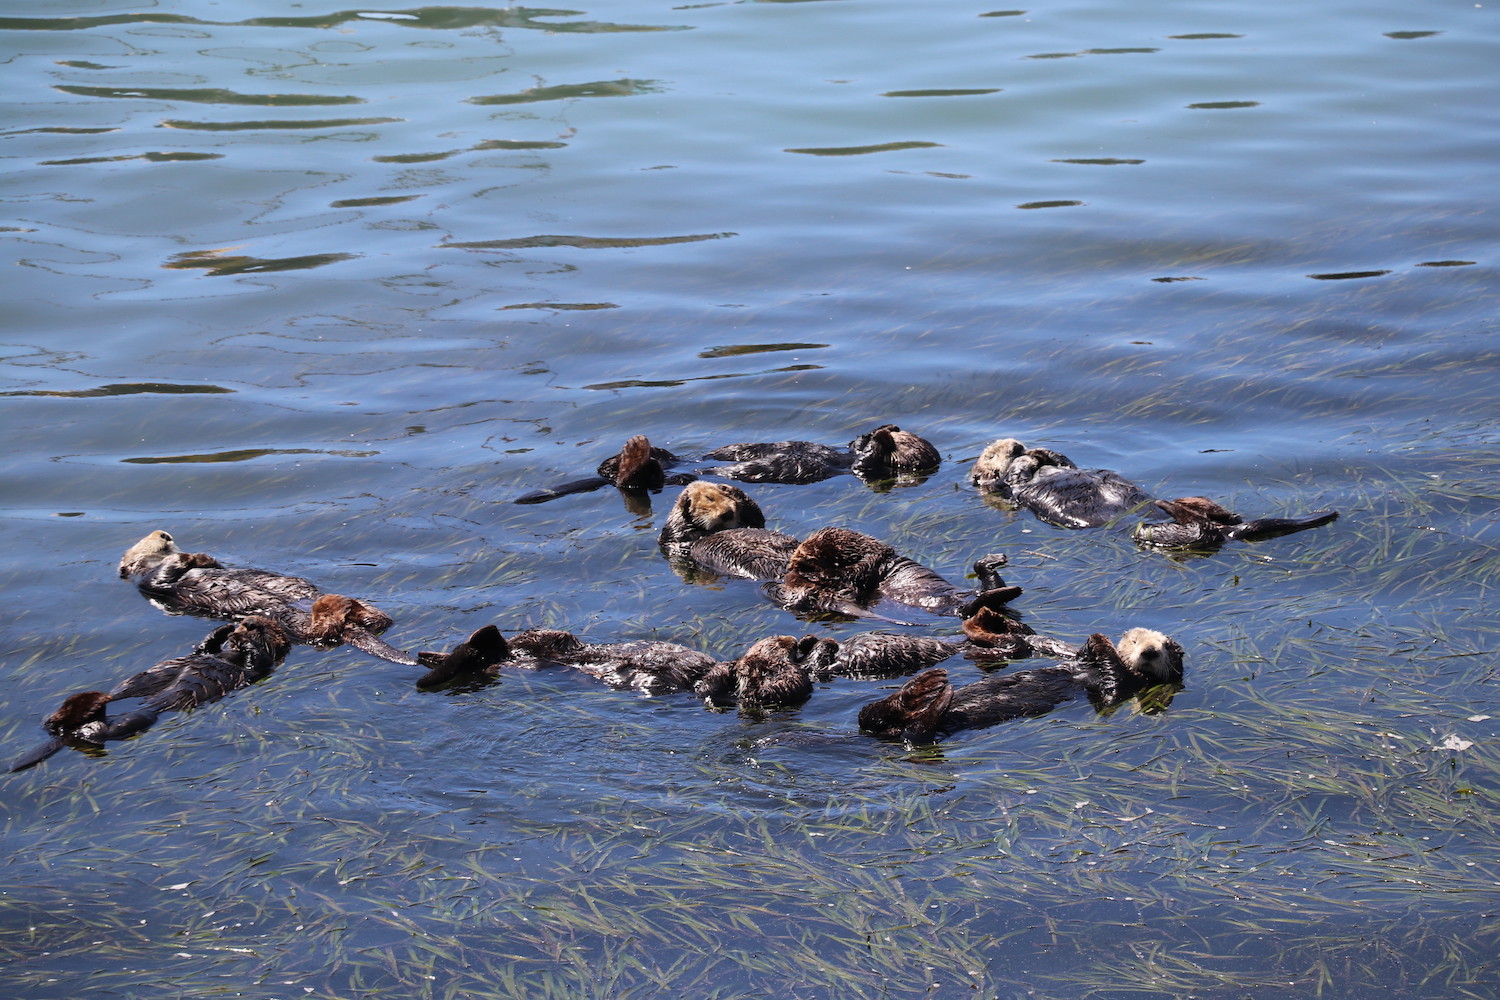 a group of sea otters on their backs floating in the ocean over some sea gass